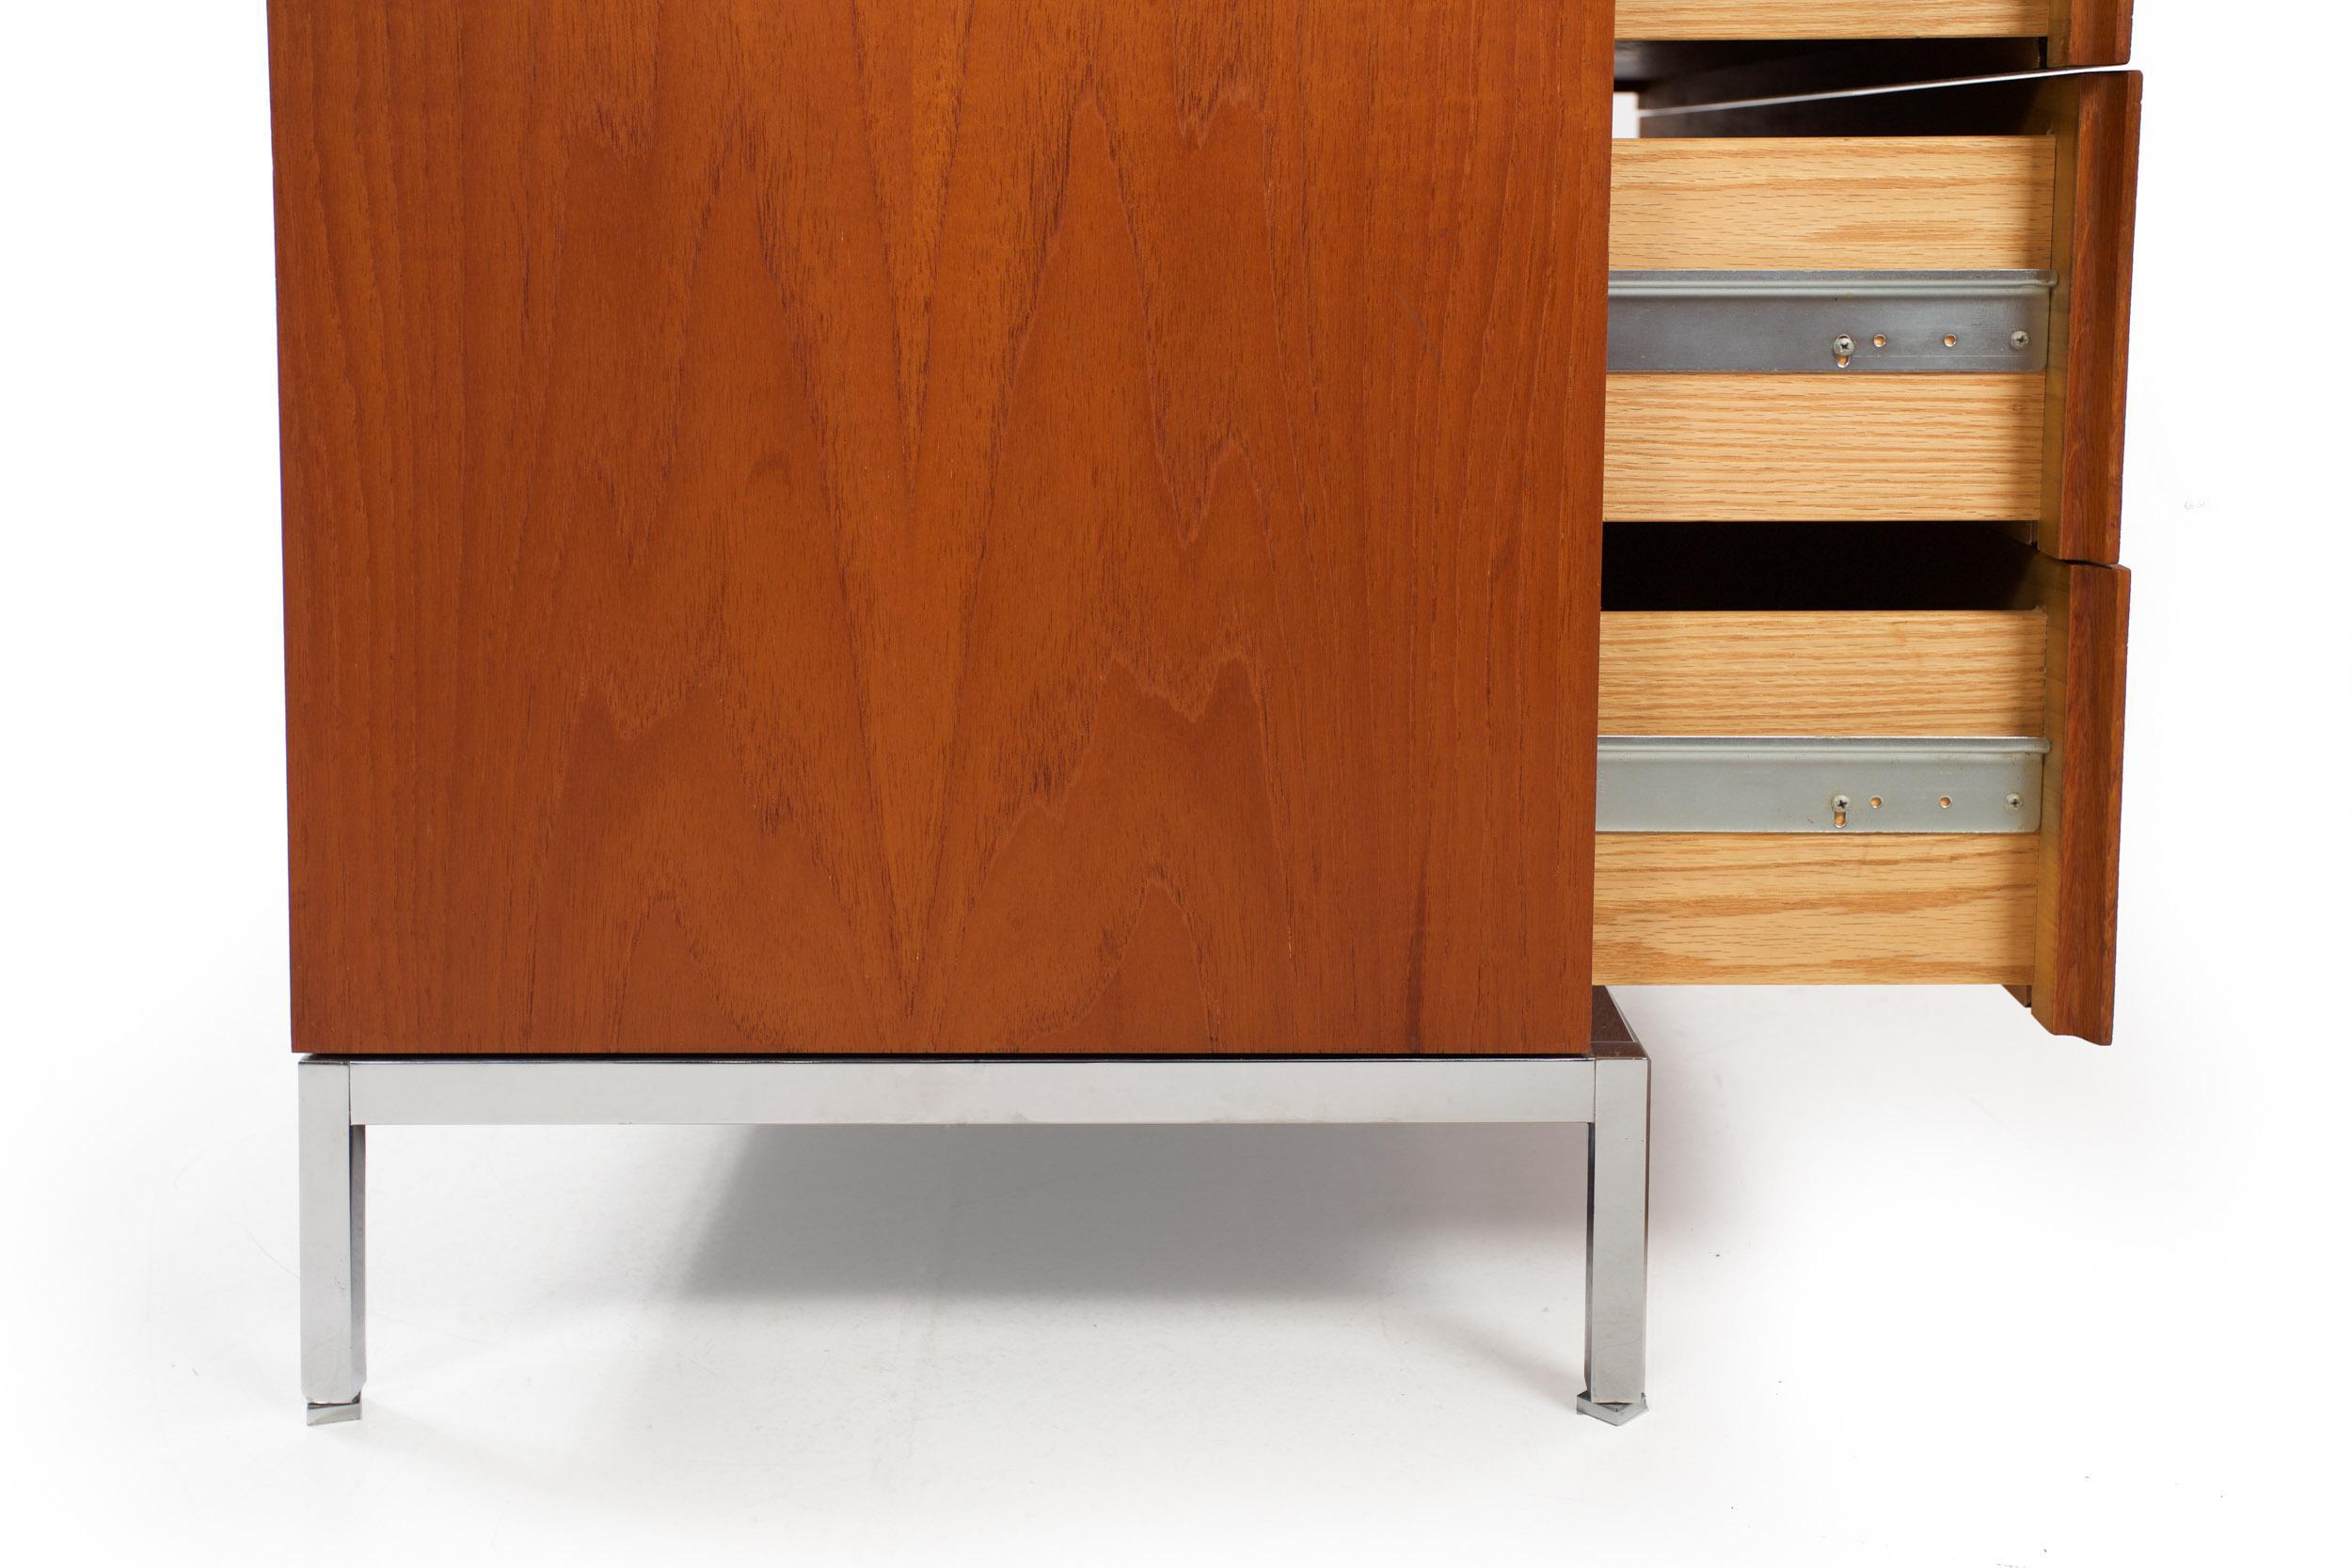 Knoll Mid-Century Modern Teak and Chrome Double Chest Credenza, circa 1970 For Sale 6